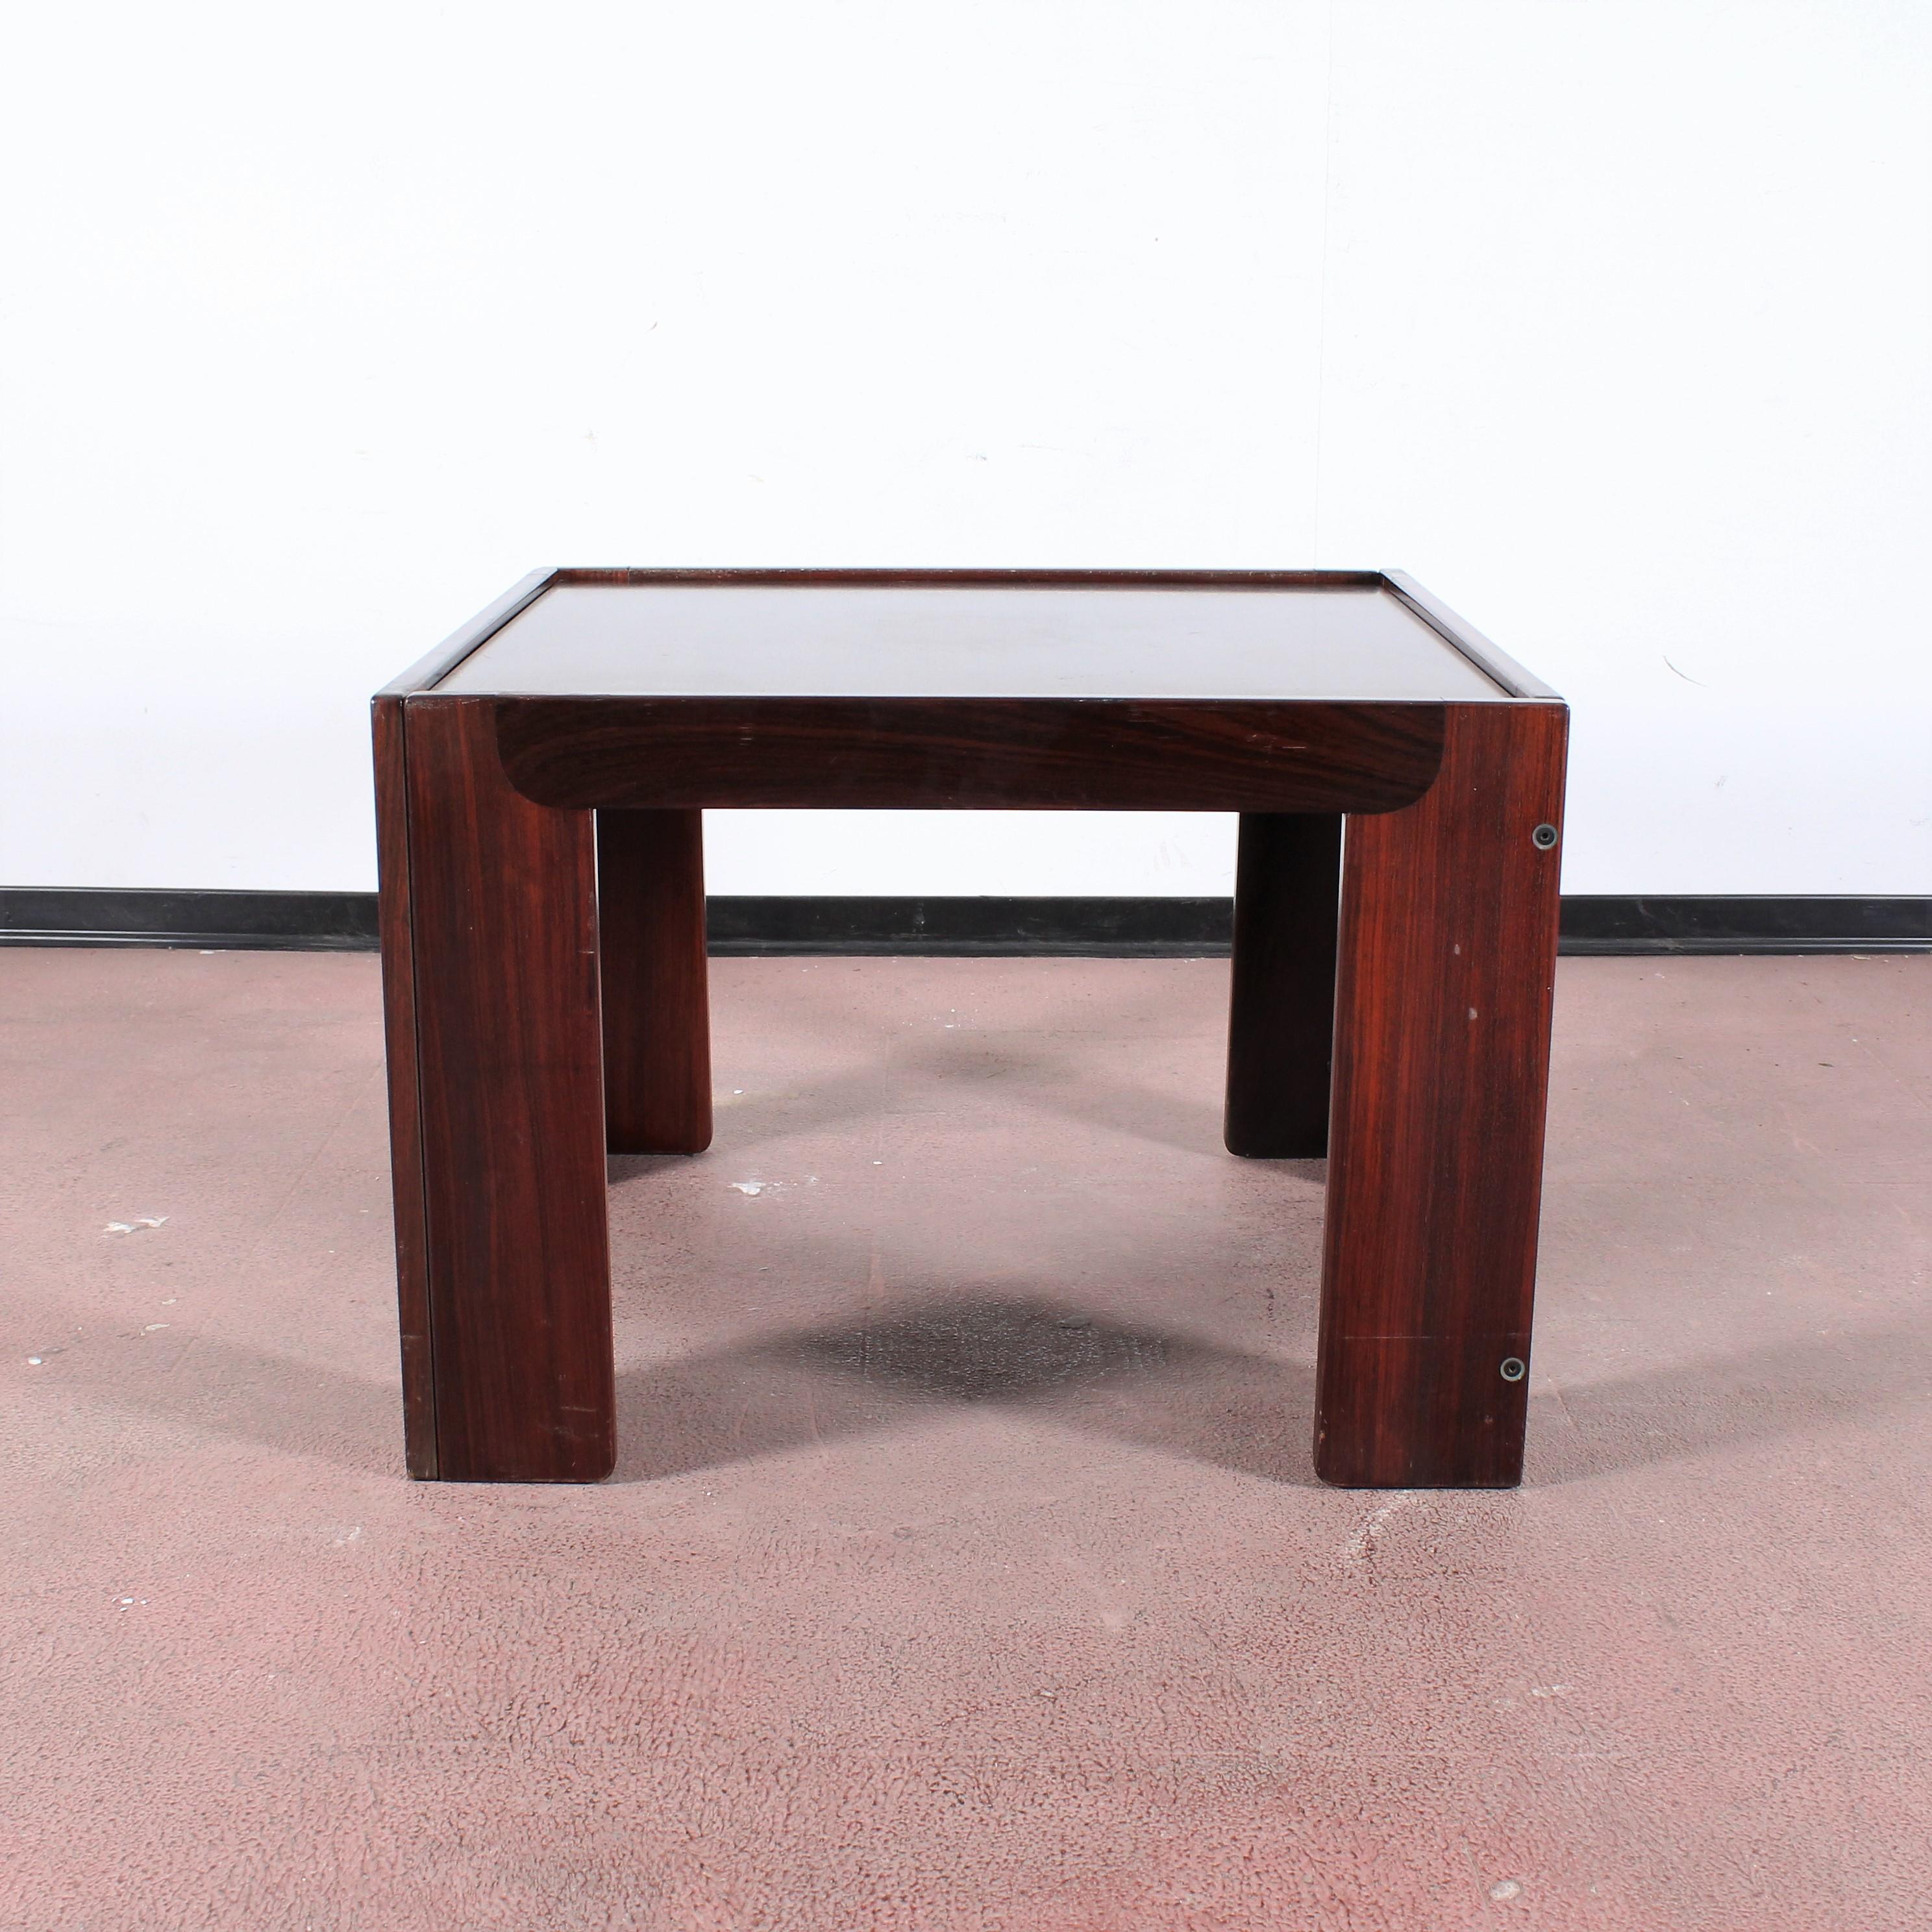 Mid-Century A. & T. Scarpa for Cassina, Meda Wood Coffee Table mod 771 '65 Italy 1